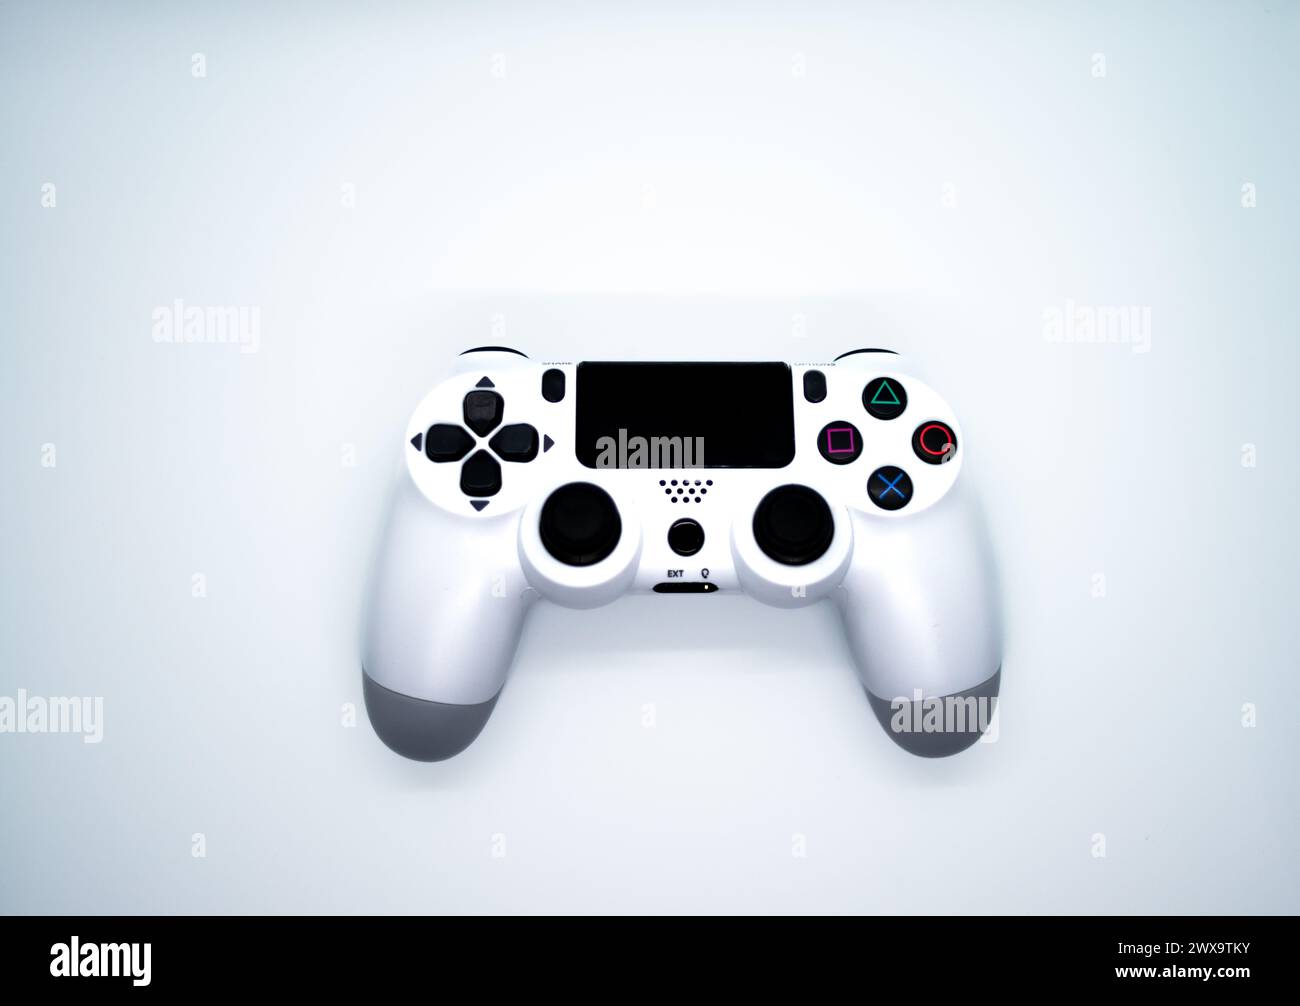 Immerse yourself in the world of gaming with a sleek white gamepad, the ultimate accessory for an exciting digital entertainment experience. Stock Photo